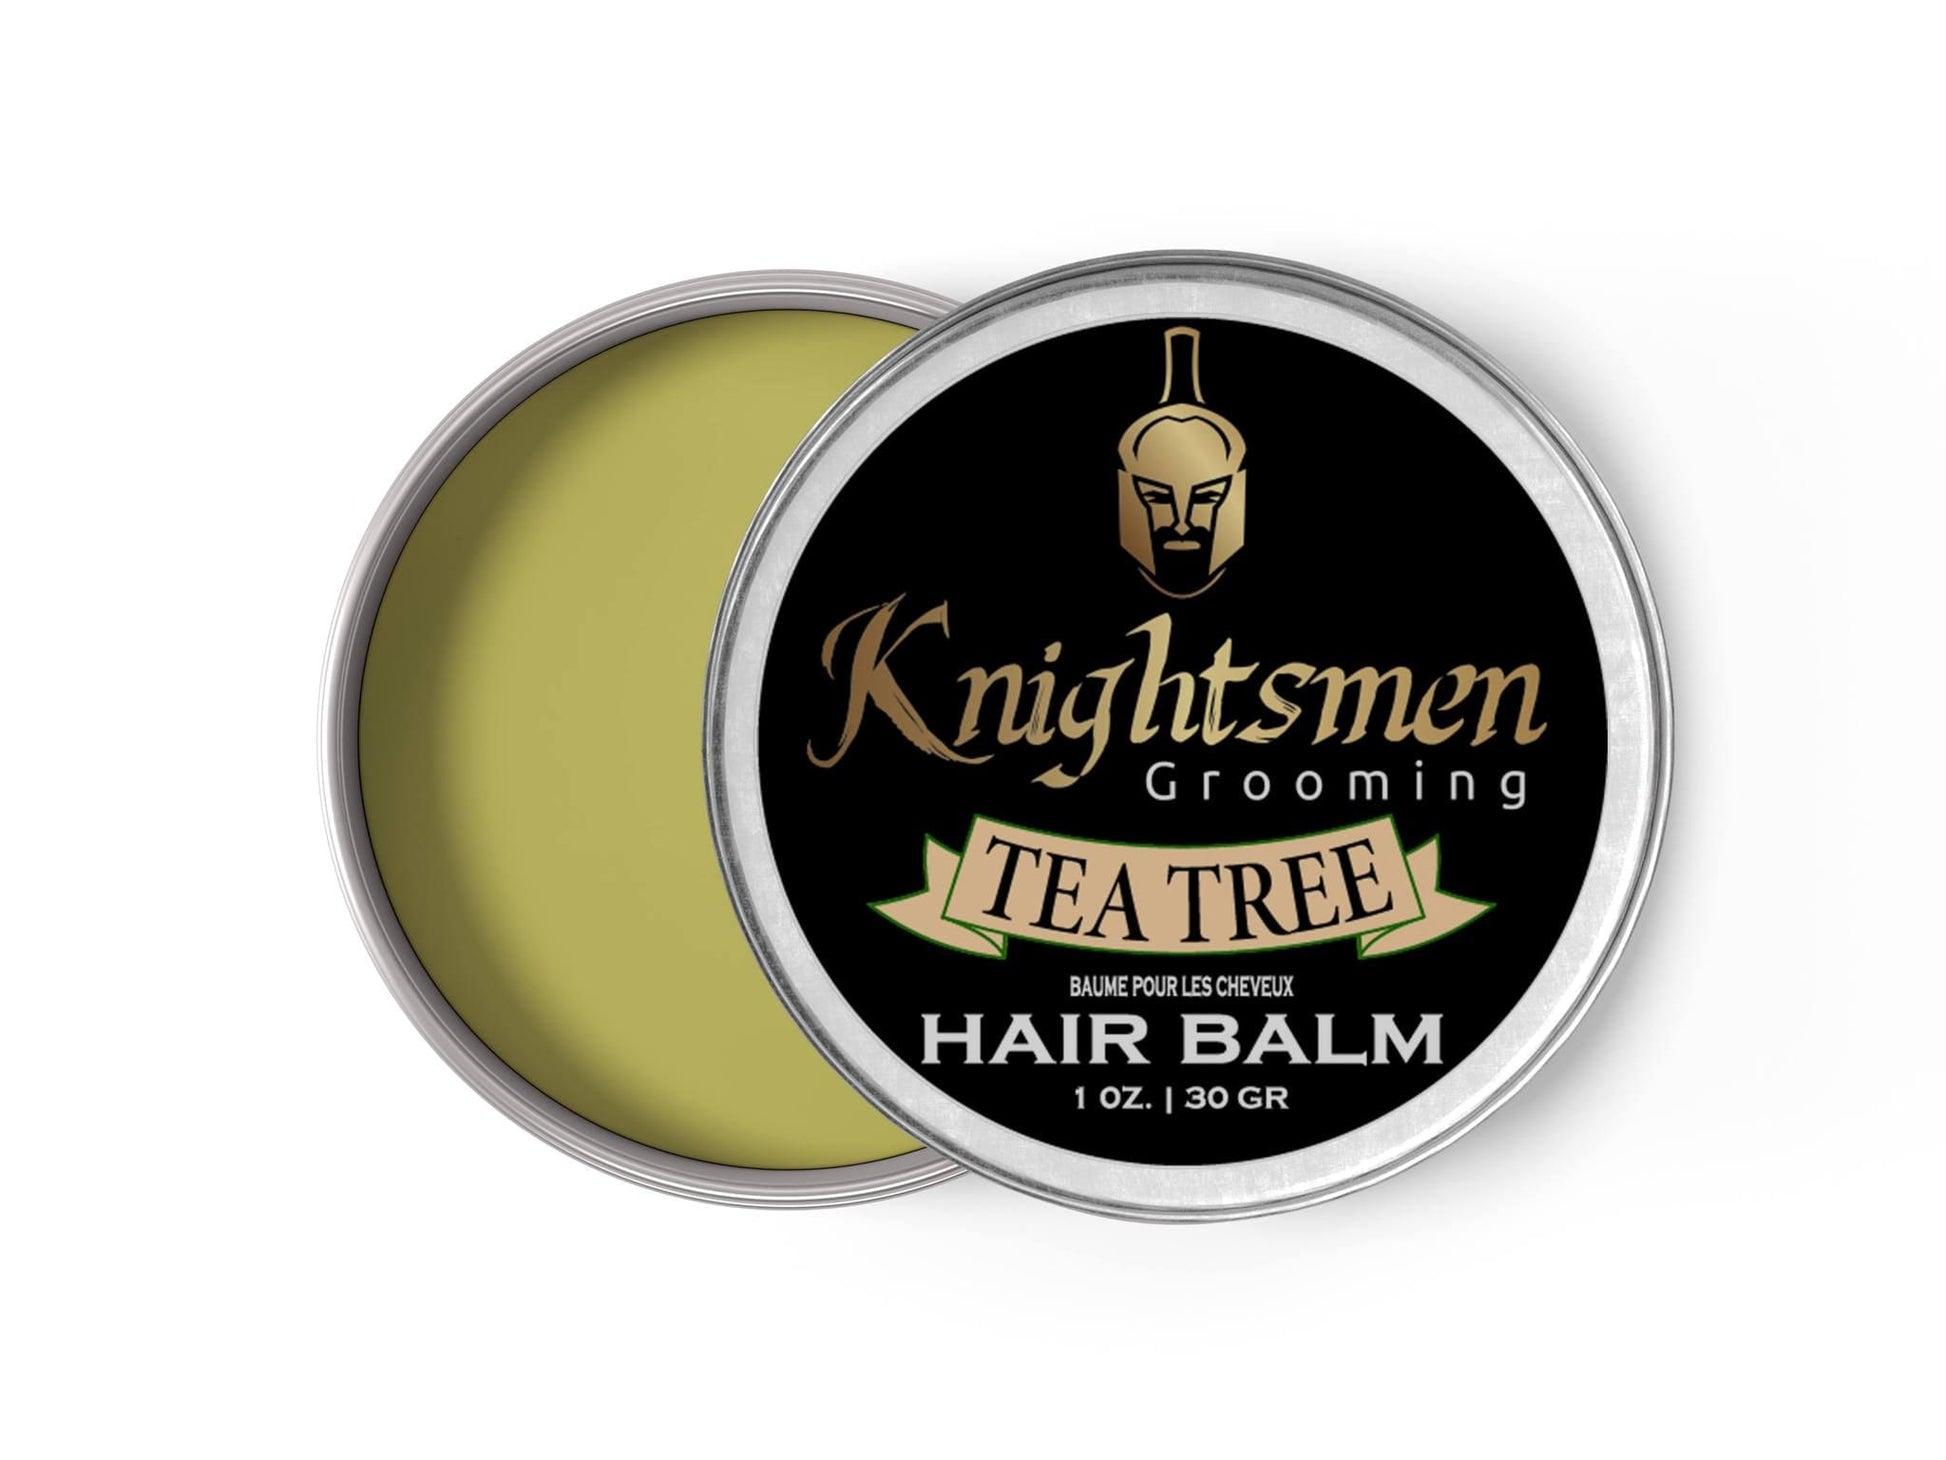 Tea Tree Hair Balm and Hair Balm Kit for Hair Growth and Hair Conditioning by Knightsmen Grooming for all hair growth, hair care, hair conditioning, hair softener, hair serum, hair growth formula, hair balm recipe, hair balm, organic hair balm, scented hair balm, best hair balm, hair balm canada, hair balm toronto, hair balm for men